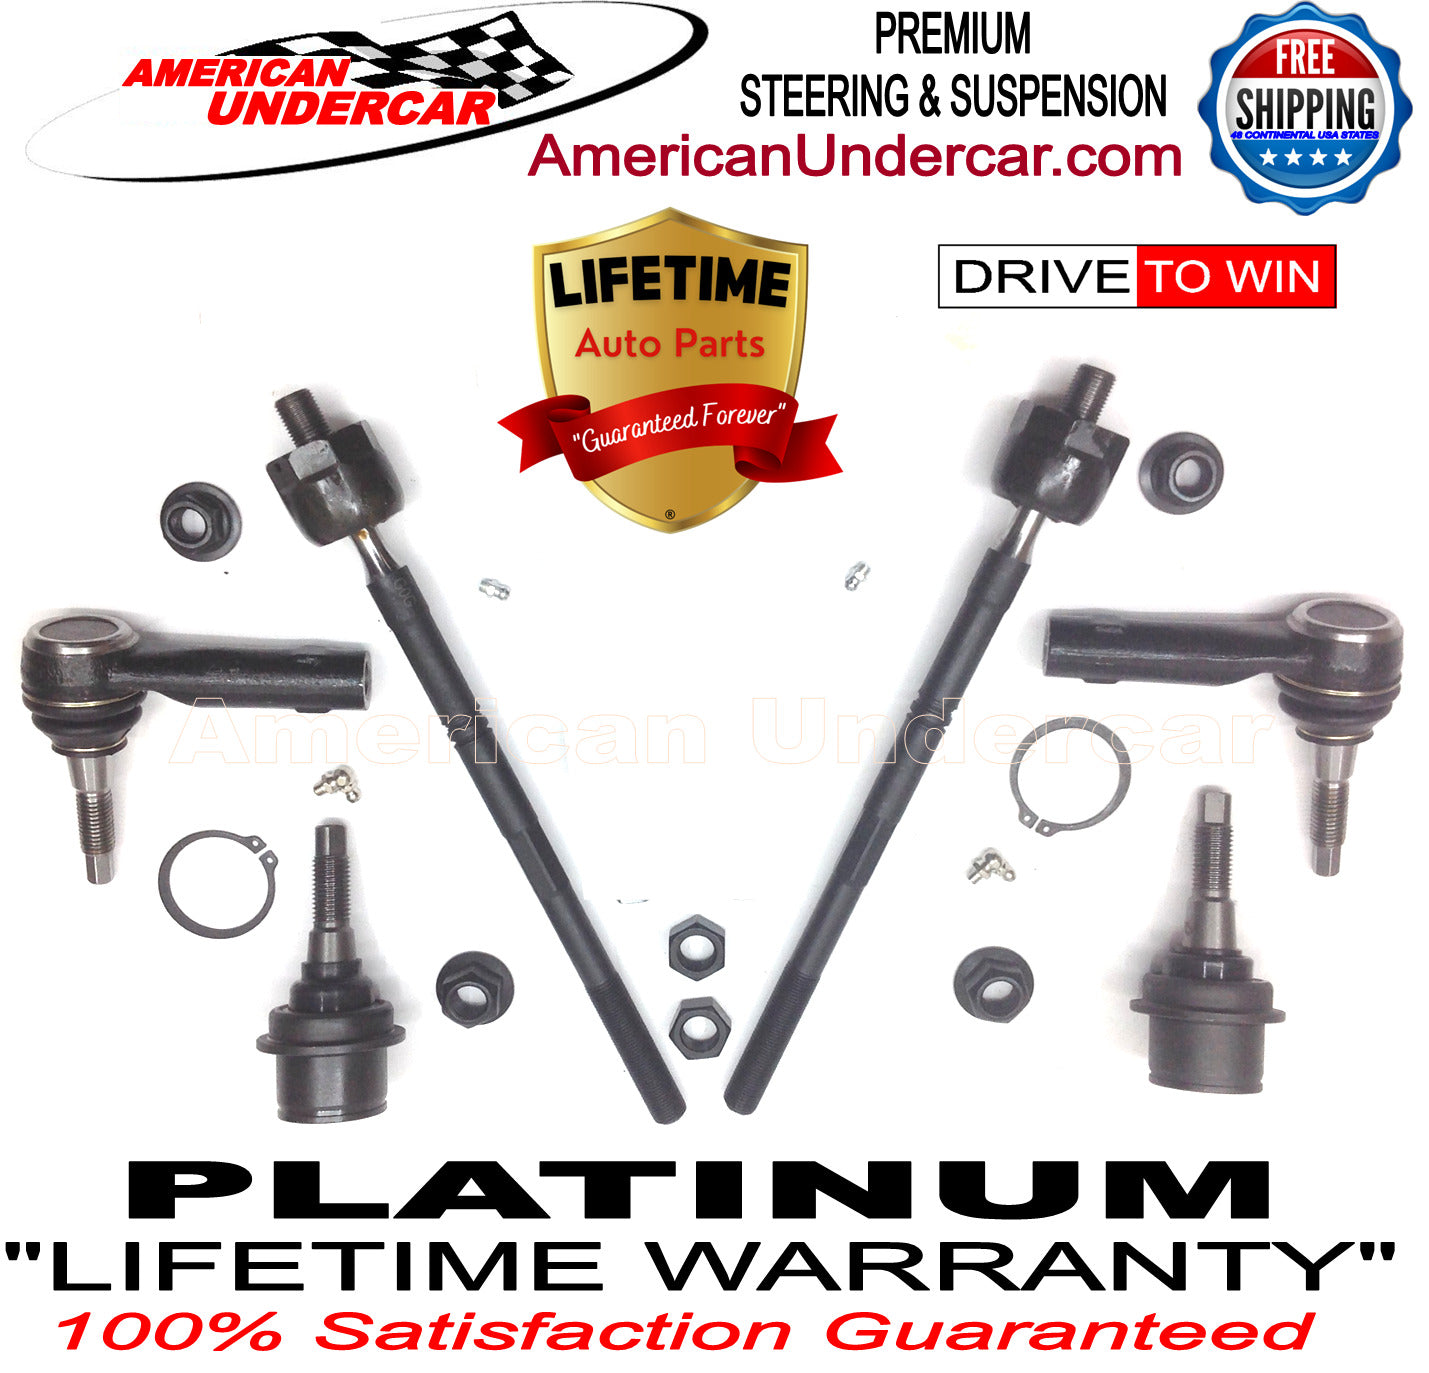 Lifetime Lower Ball Joints Tie Rod Steering Kit for 2009-2014 Ford F150 2WD